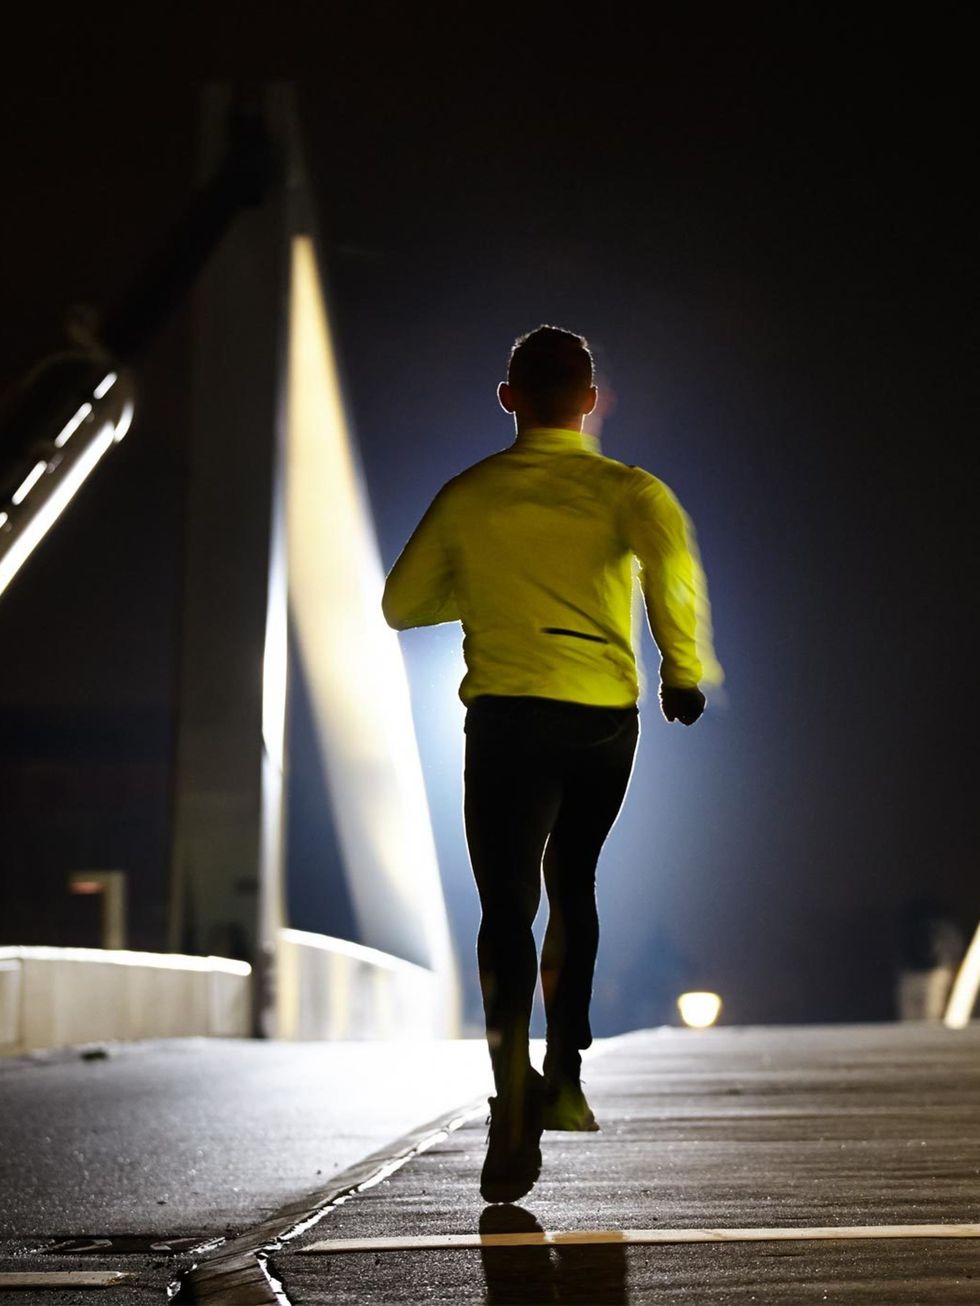 <p><strong>Be visible</strong></p><p>Make sure other runners and vehicles can see you. Invest in a head lamp for hands-free light, and wear a reflective vest. It's chic to be safe.</p><p><em><a href="http://www.elleuk.com/beauty/running/kit-for-running-in